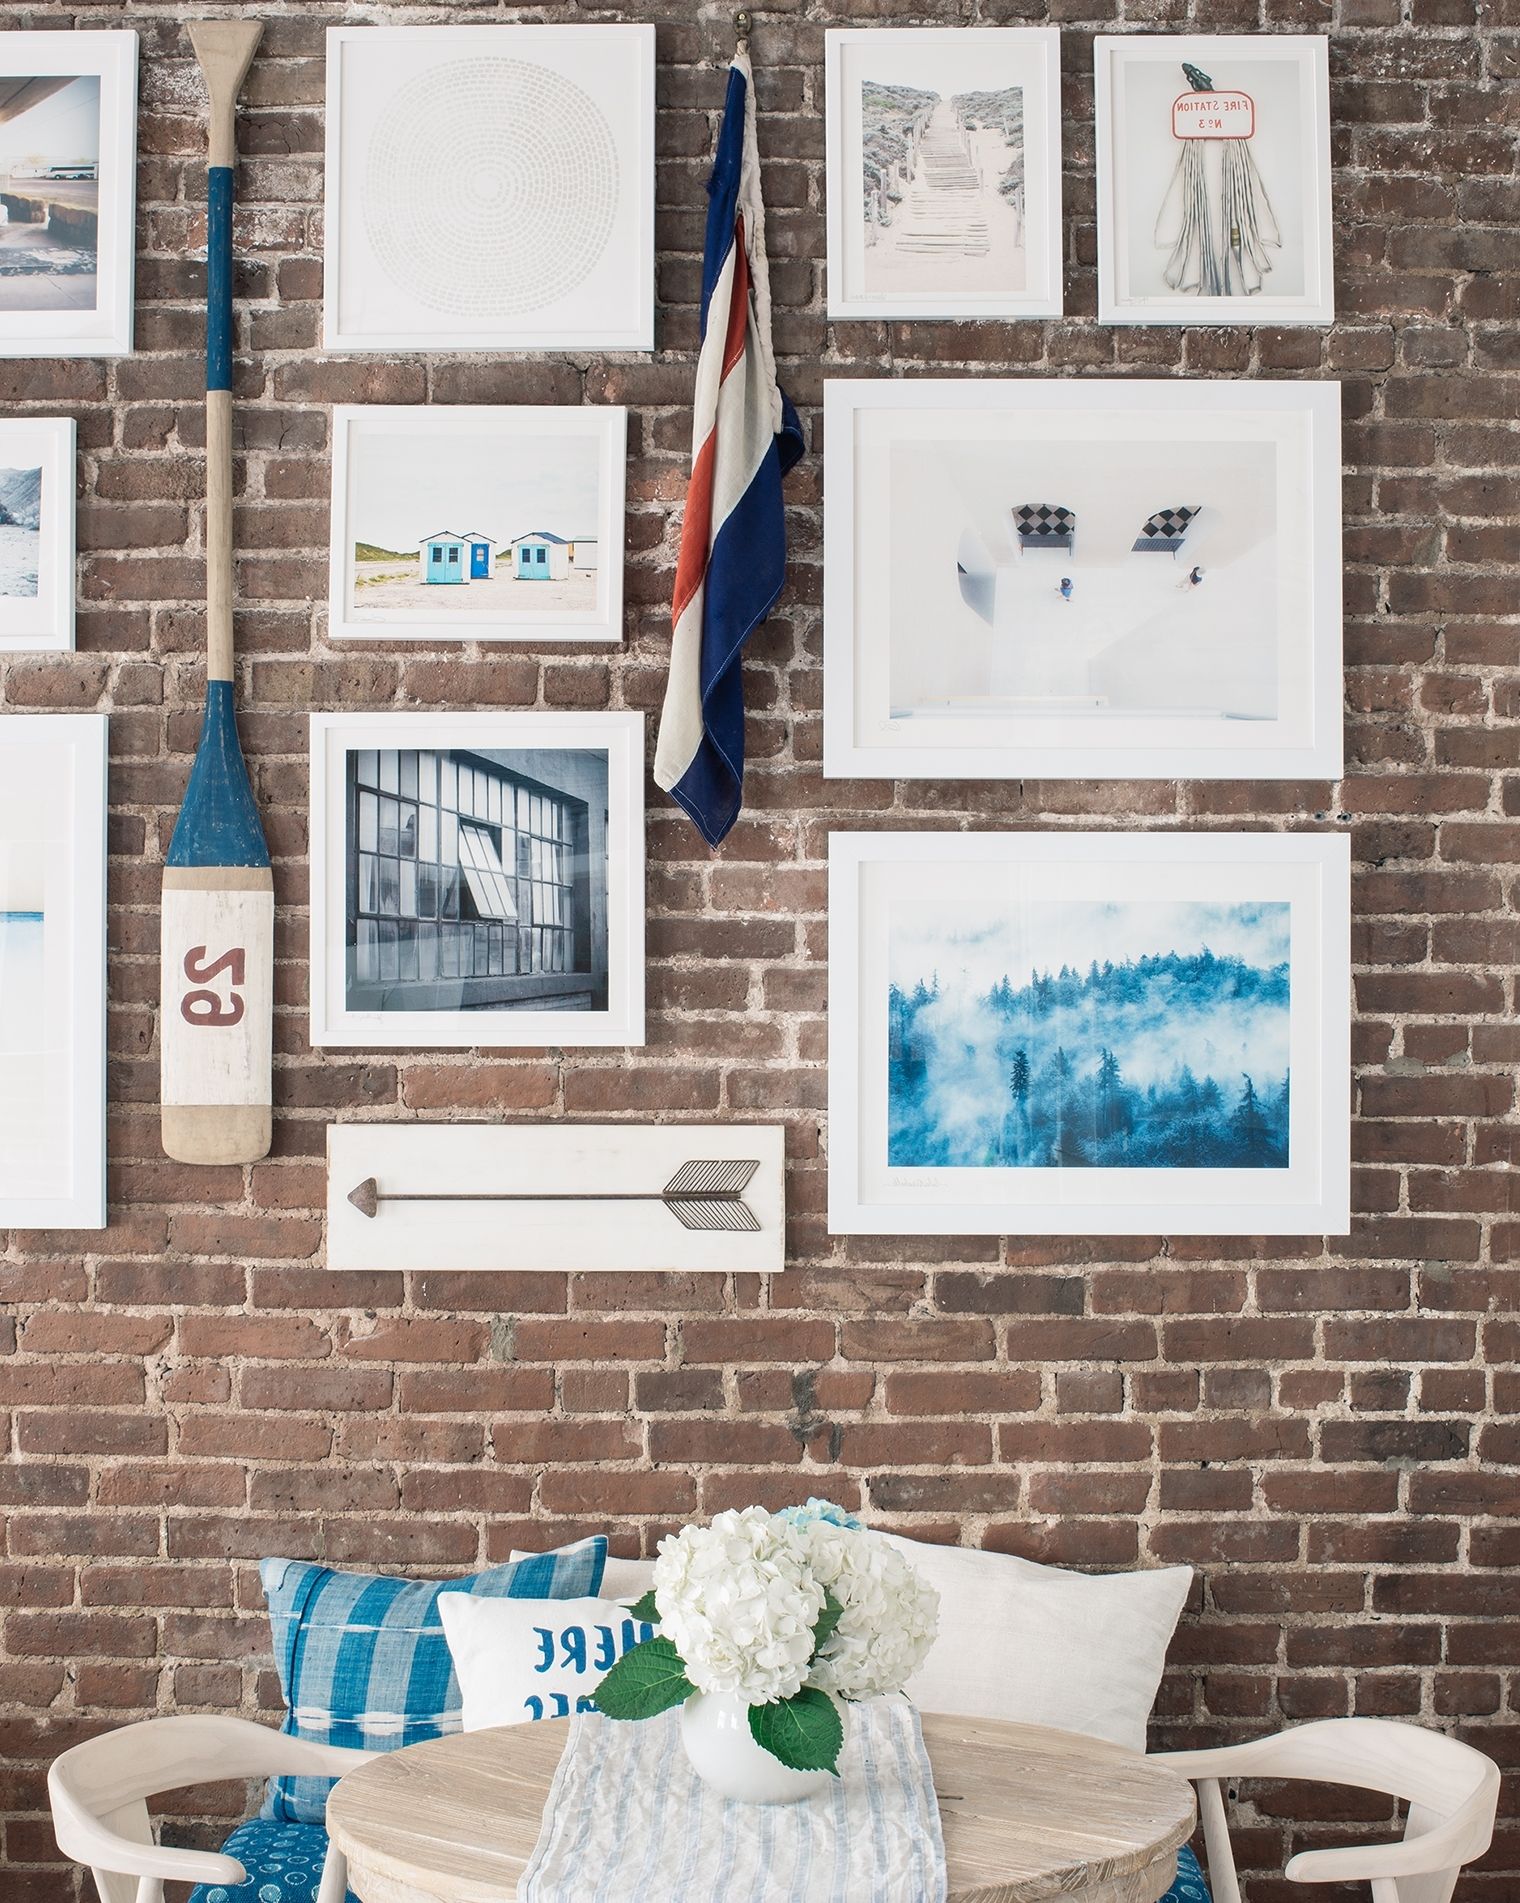 Widely Used Hanging Wall Art For Brick Wall Regarding How To Hang A Gallery Wall On Exposed Brick Walls – Bright Bazaar (View 4 of 15)